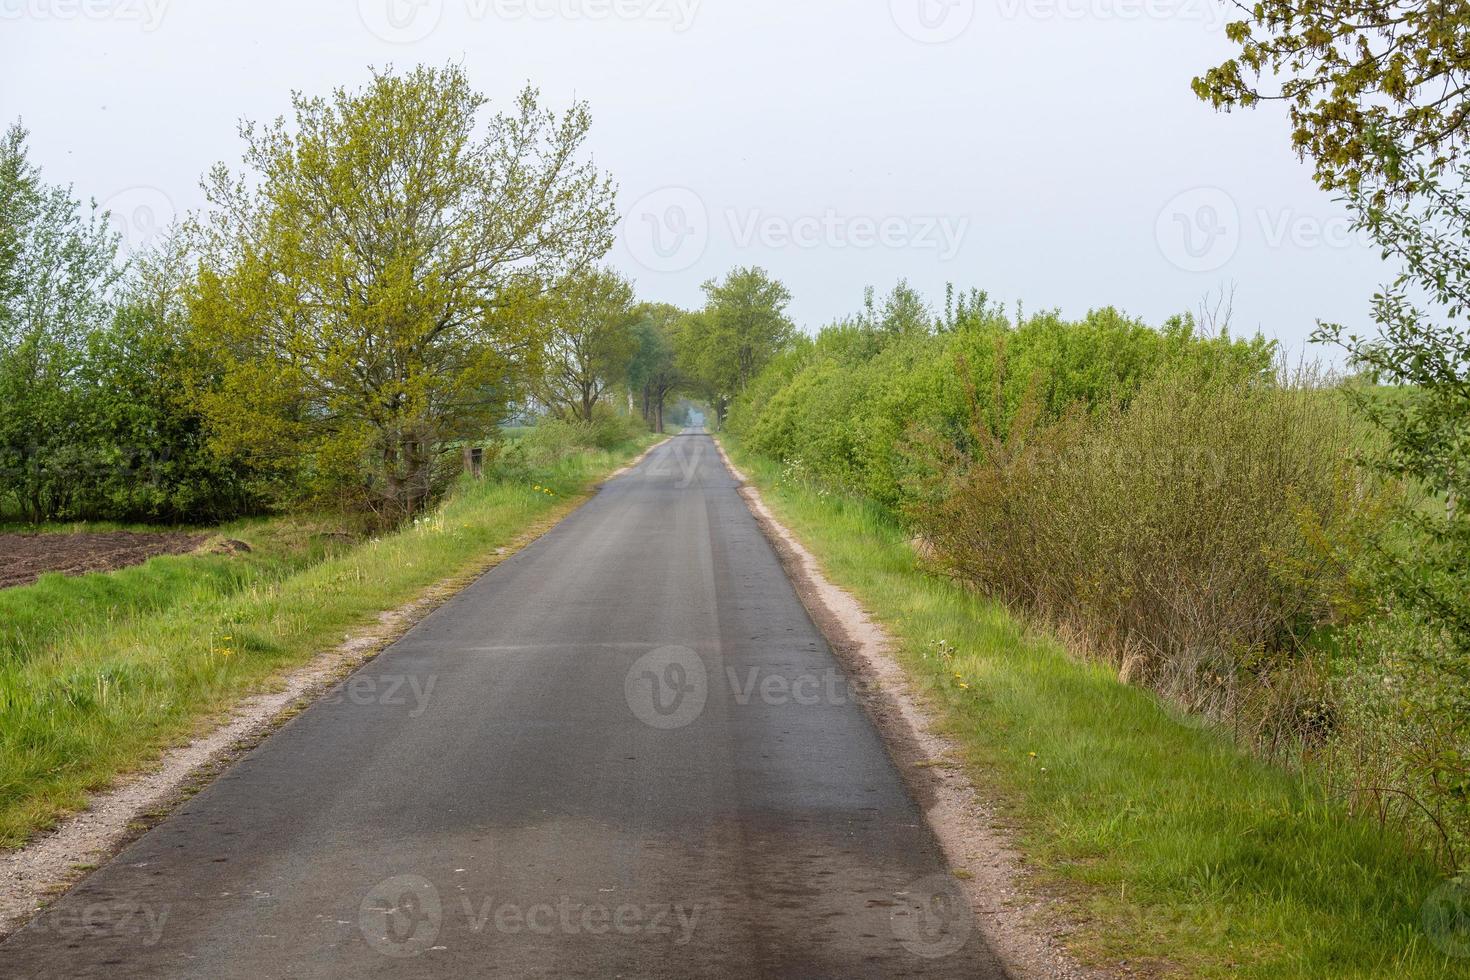 road in the countryside photo